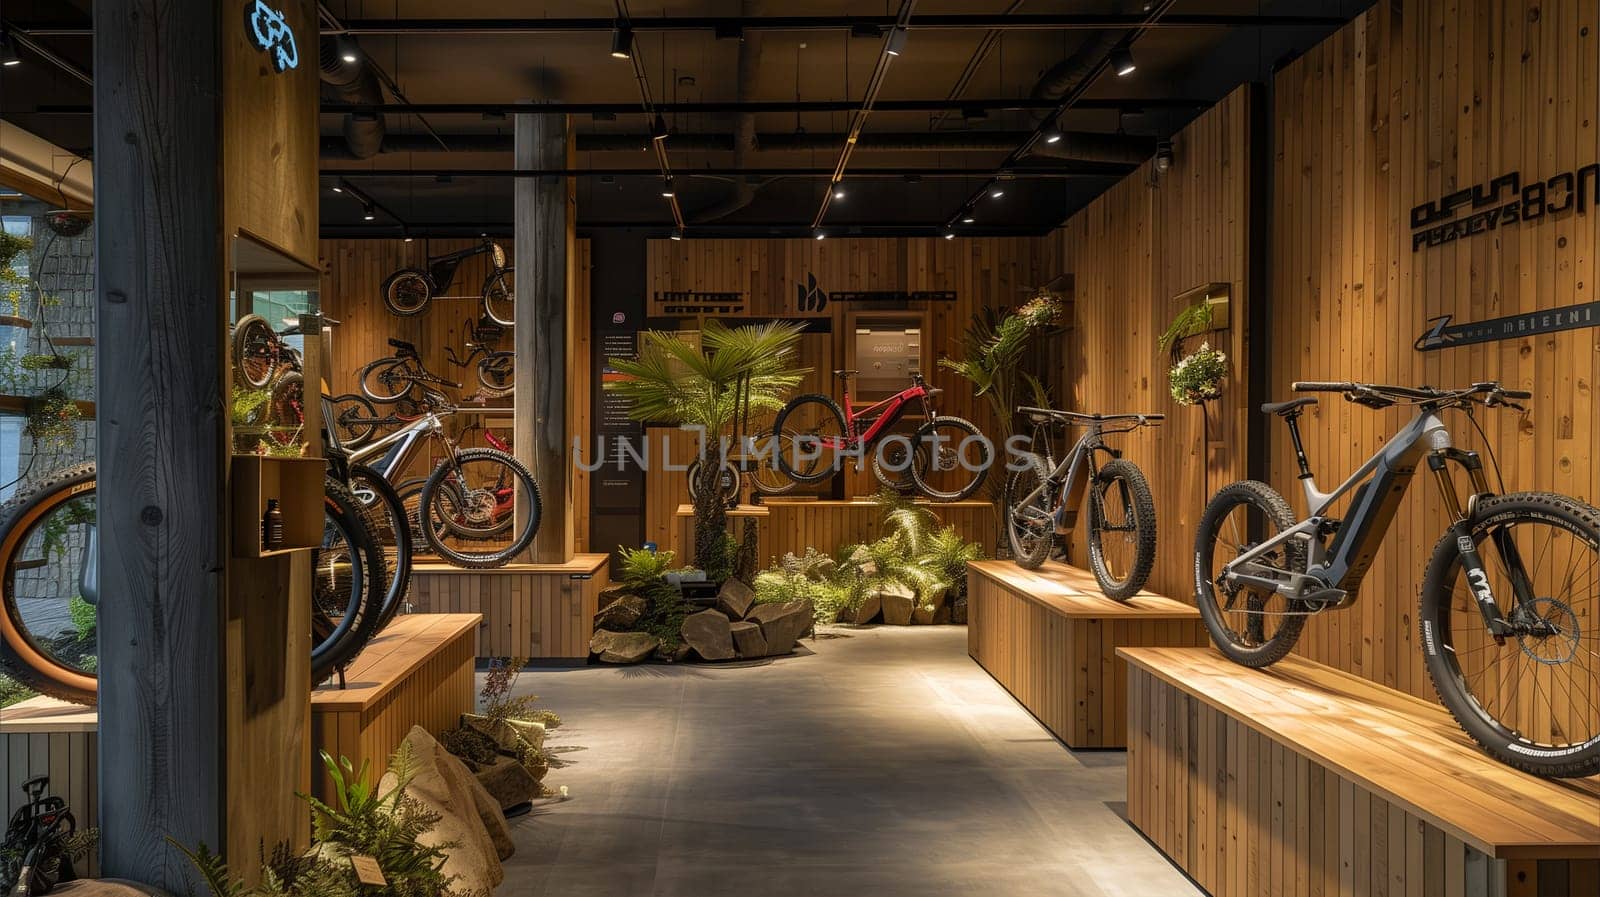 A bicycle shop filled with wooden shelves showcasing a variety of bicycles. Bikes of different styles and colors are neatly displayed in the shop.